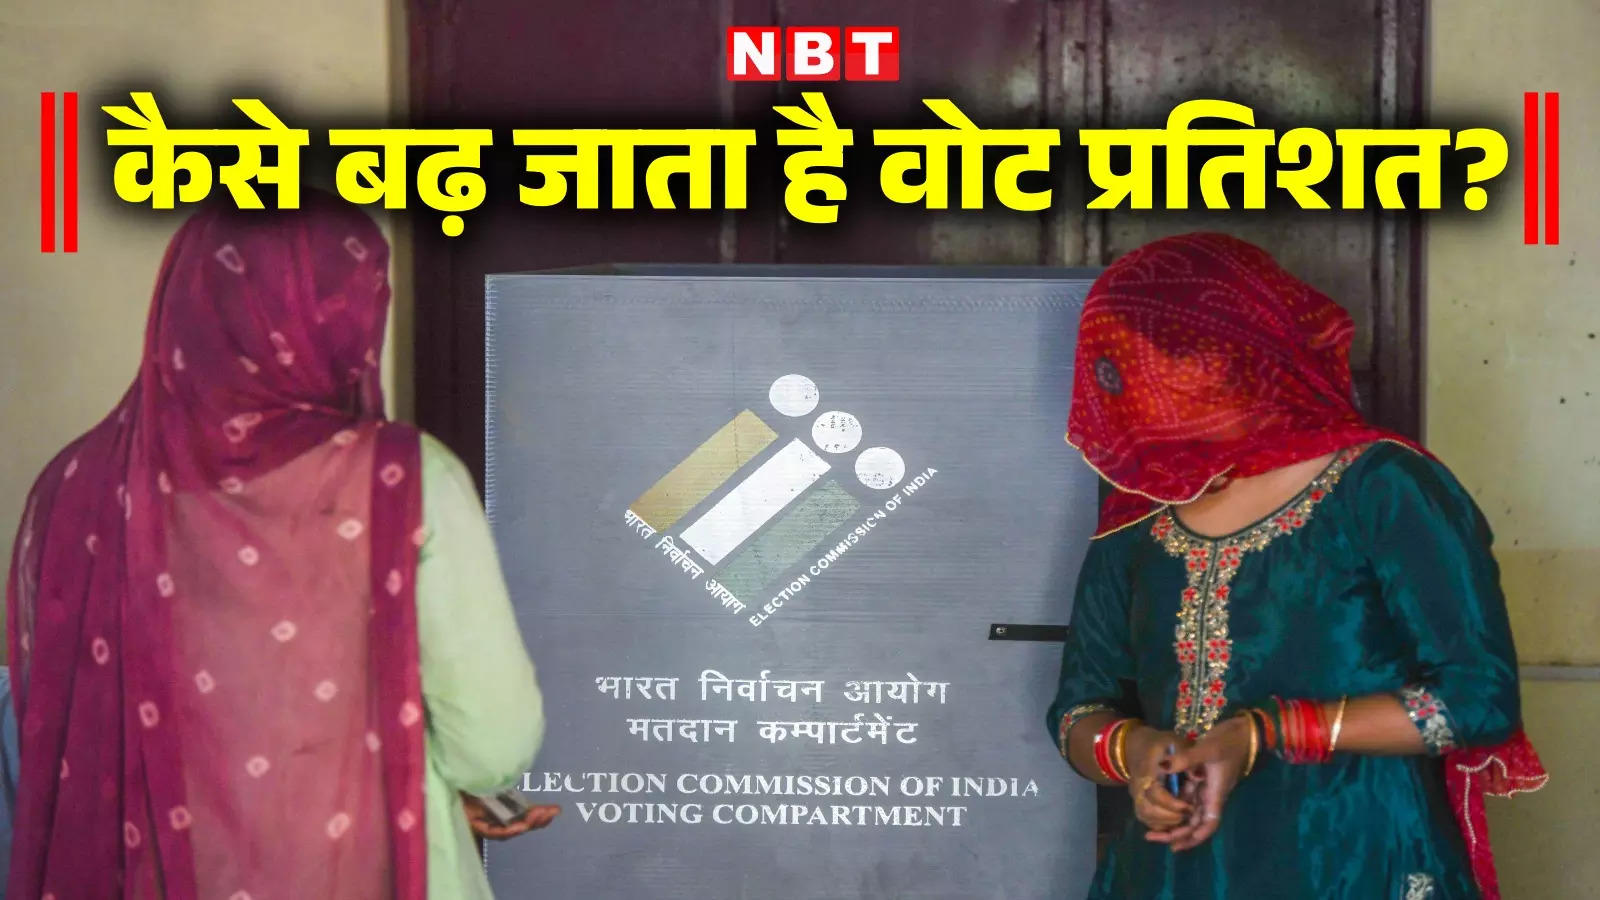 Understand how the vote percentage increases after voting in the Lok Sabha elections.